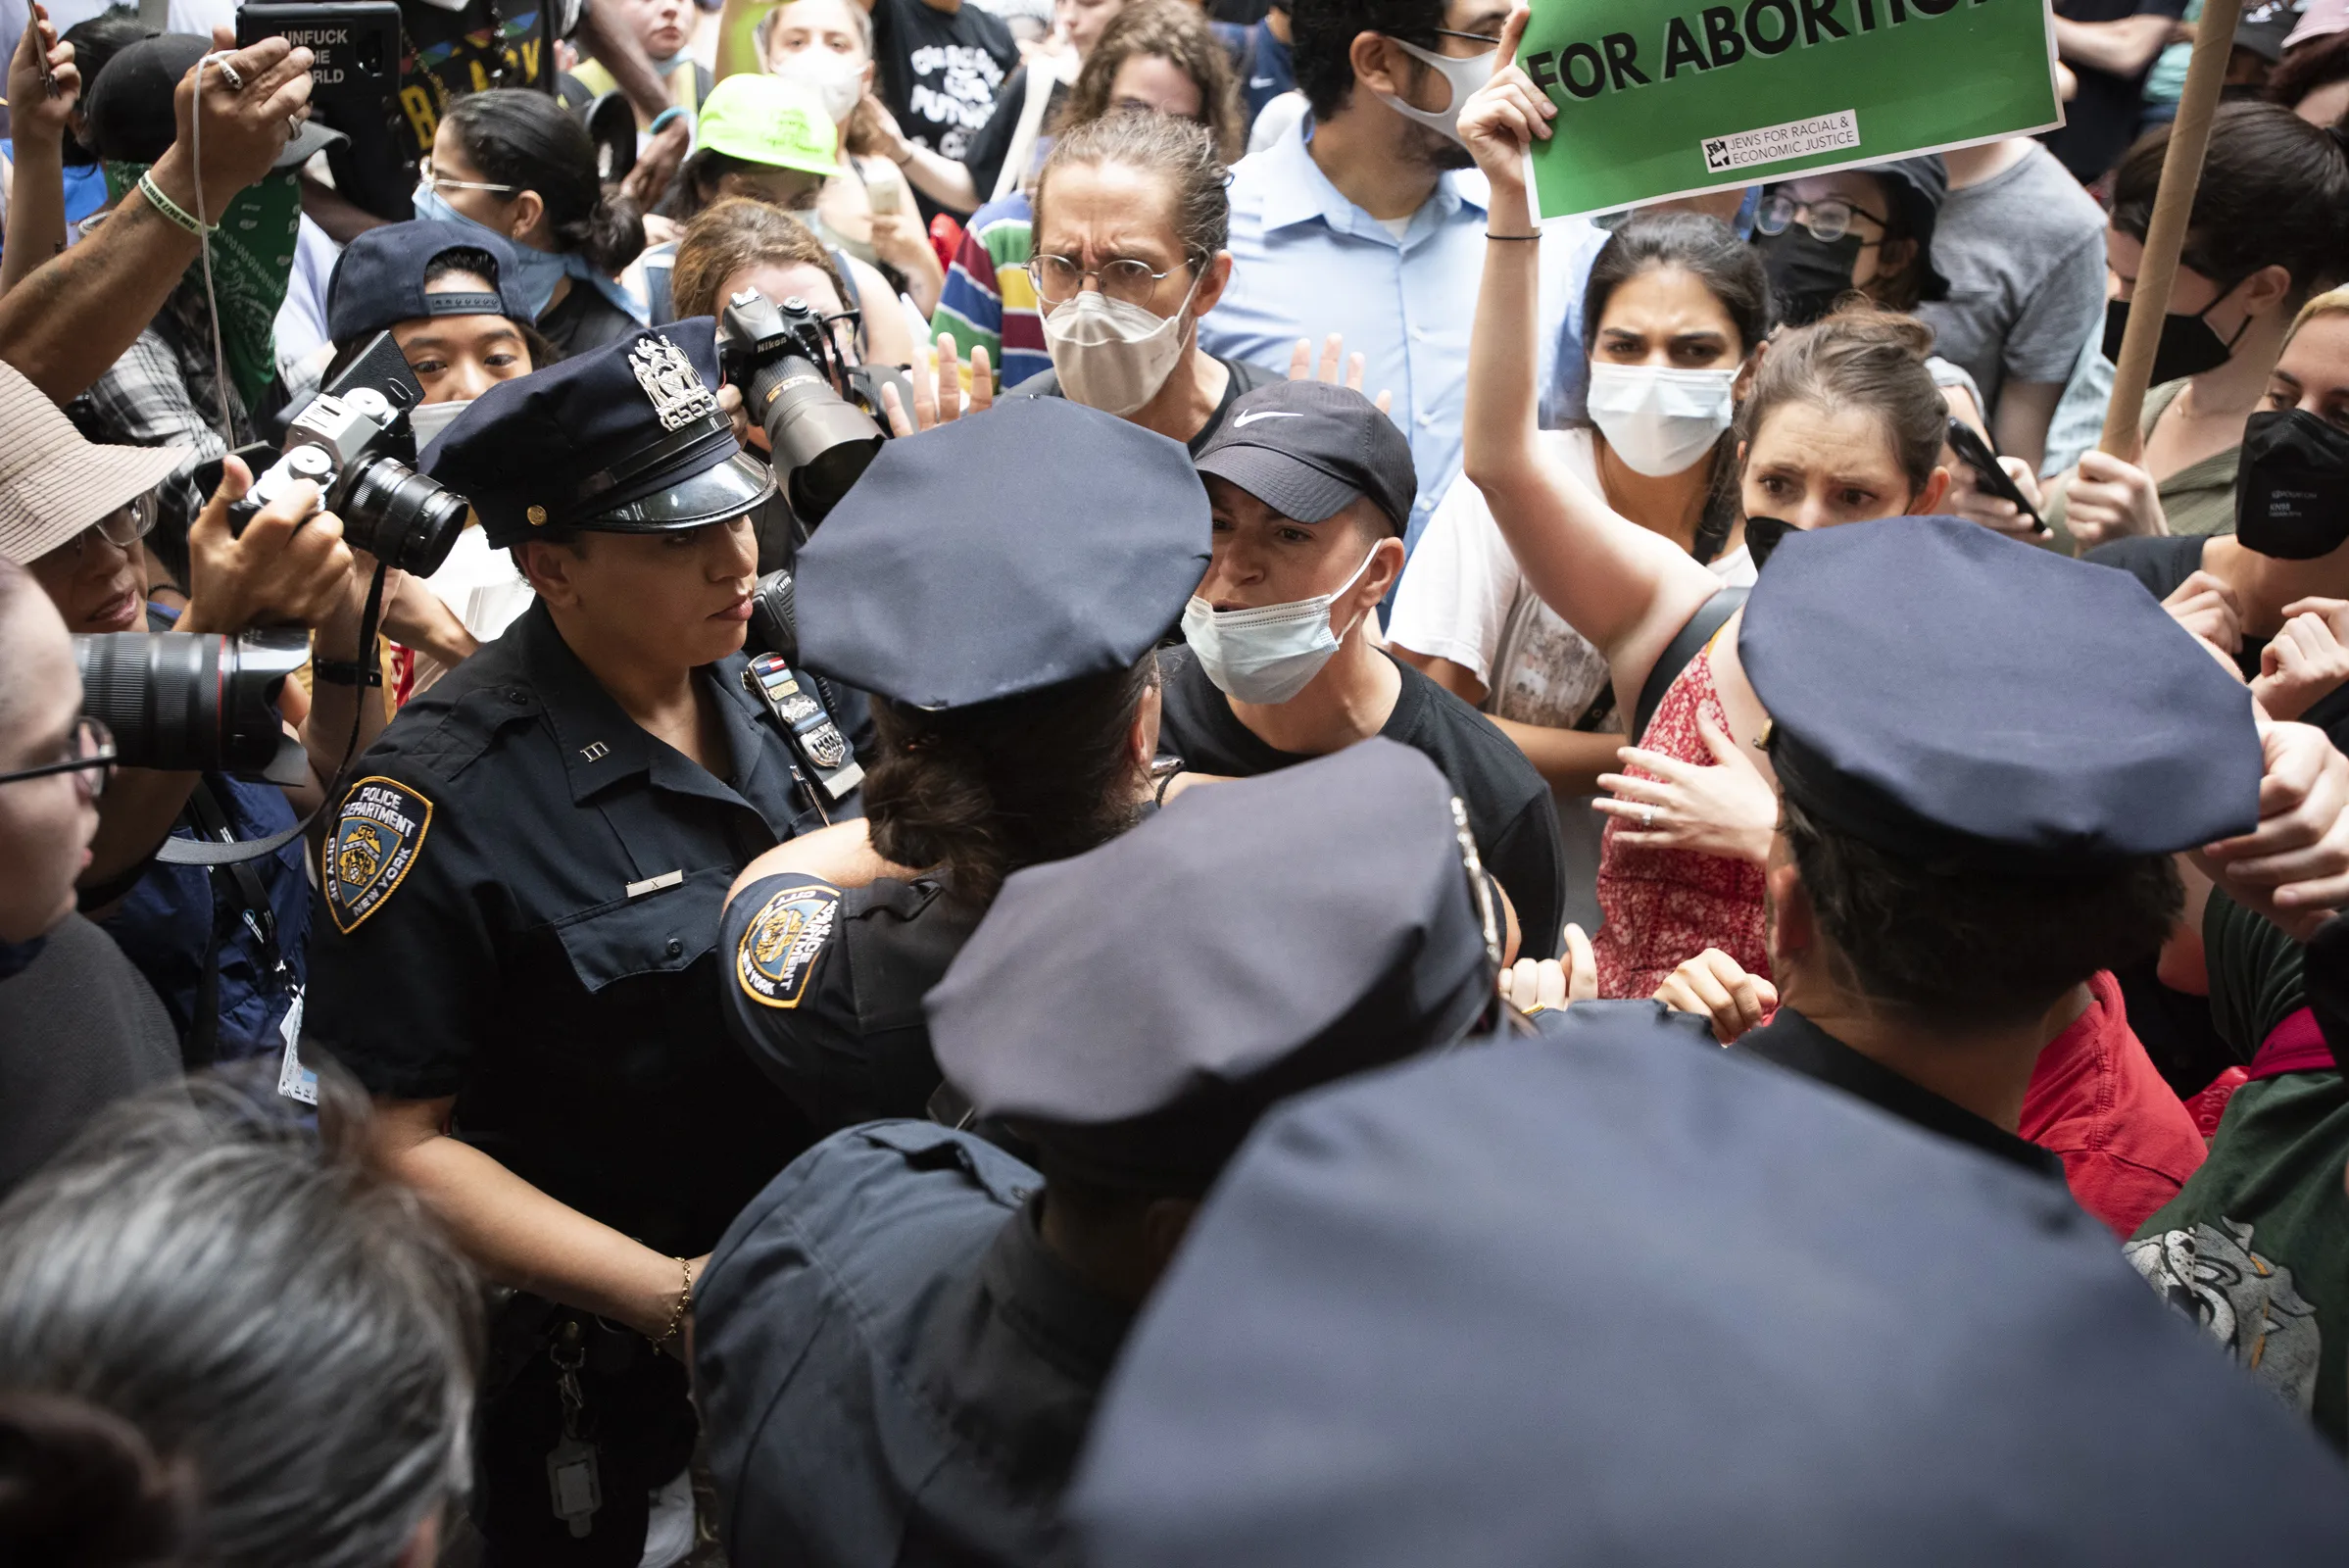 Hundreds of pro-abortion demonstrators tried to block a monthly pro-life march and prayer vigil at a Planned Parenthood abortion clinic in Lower Manhattan on July 2, 2022, setting off a tense confrontation.?w=200&h=150